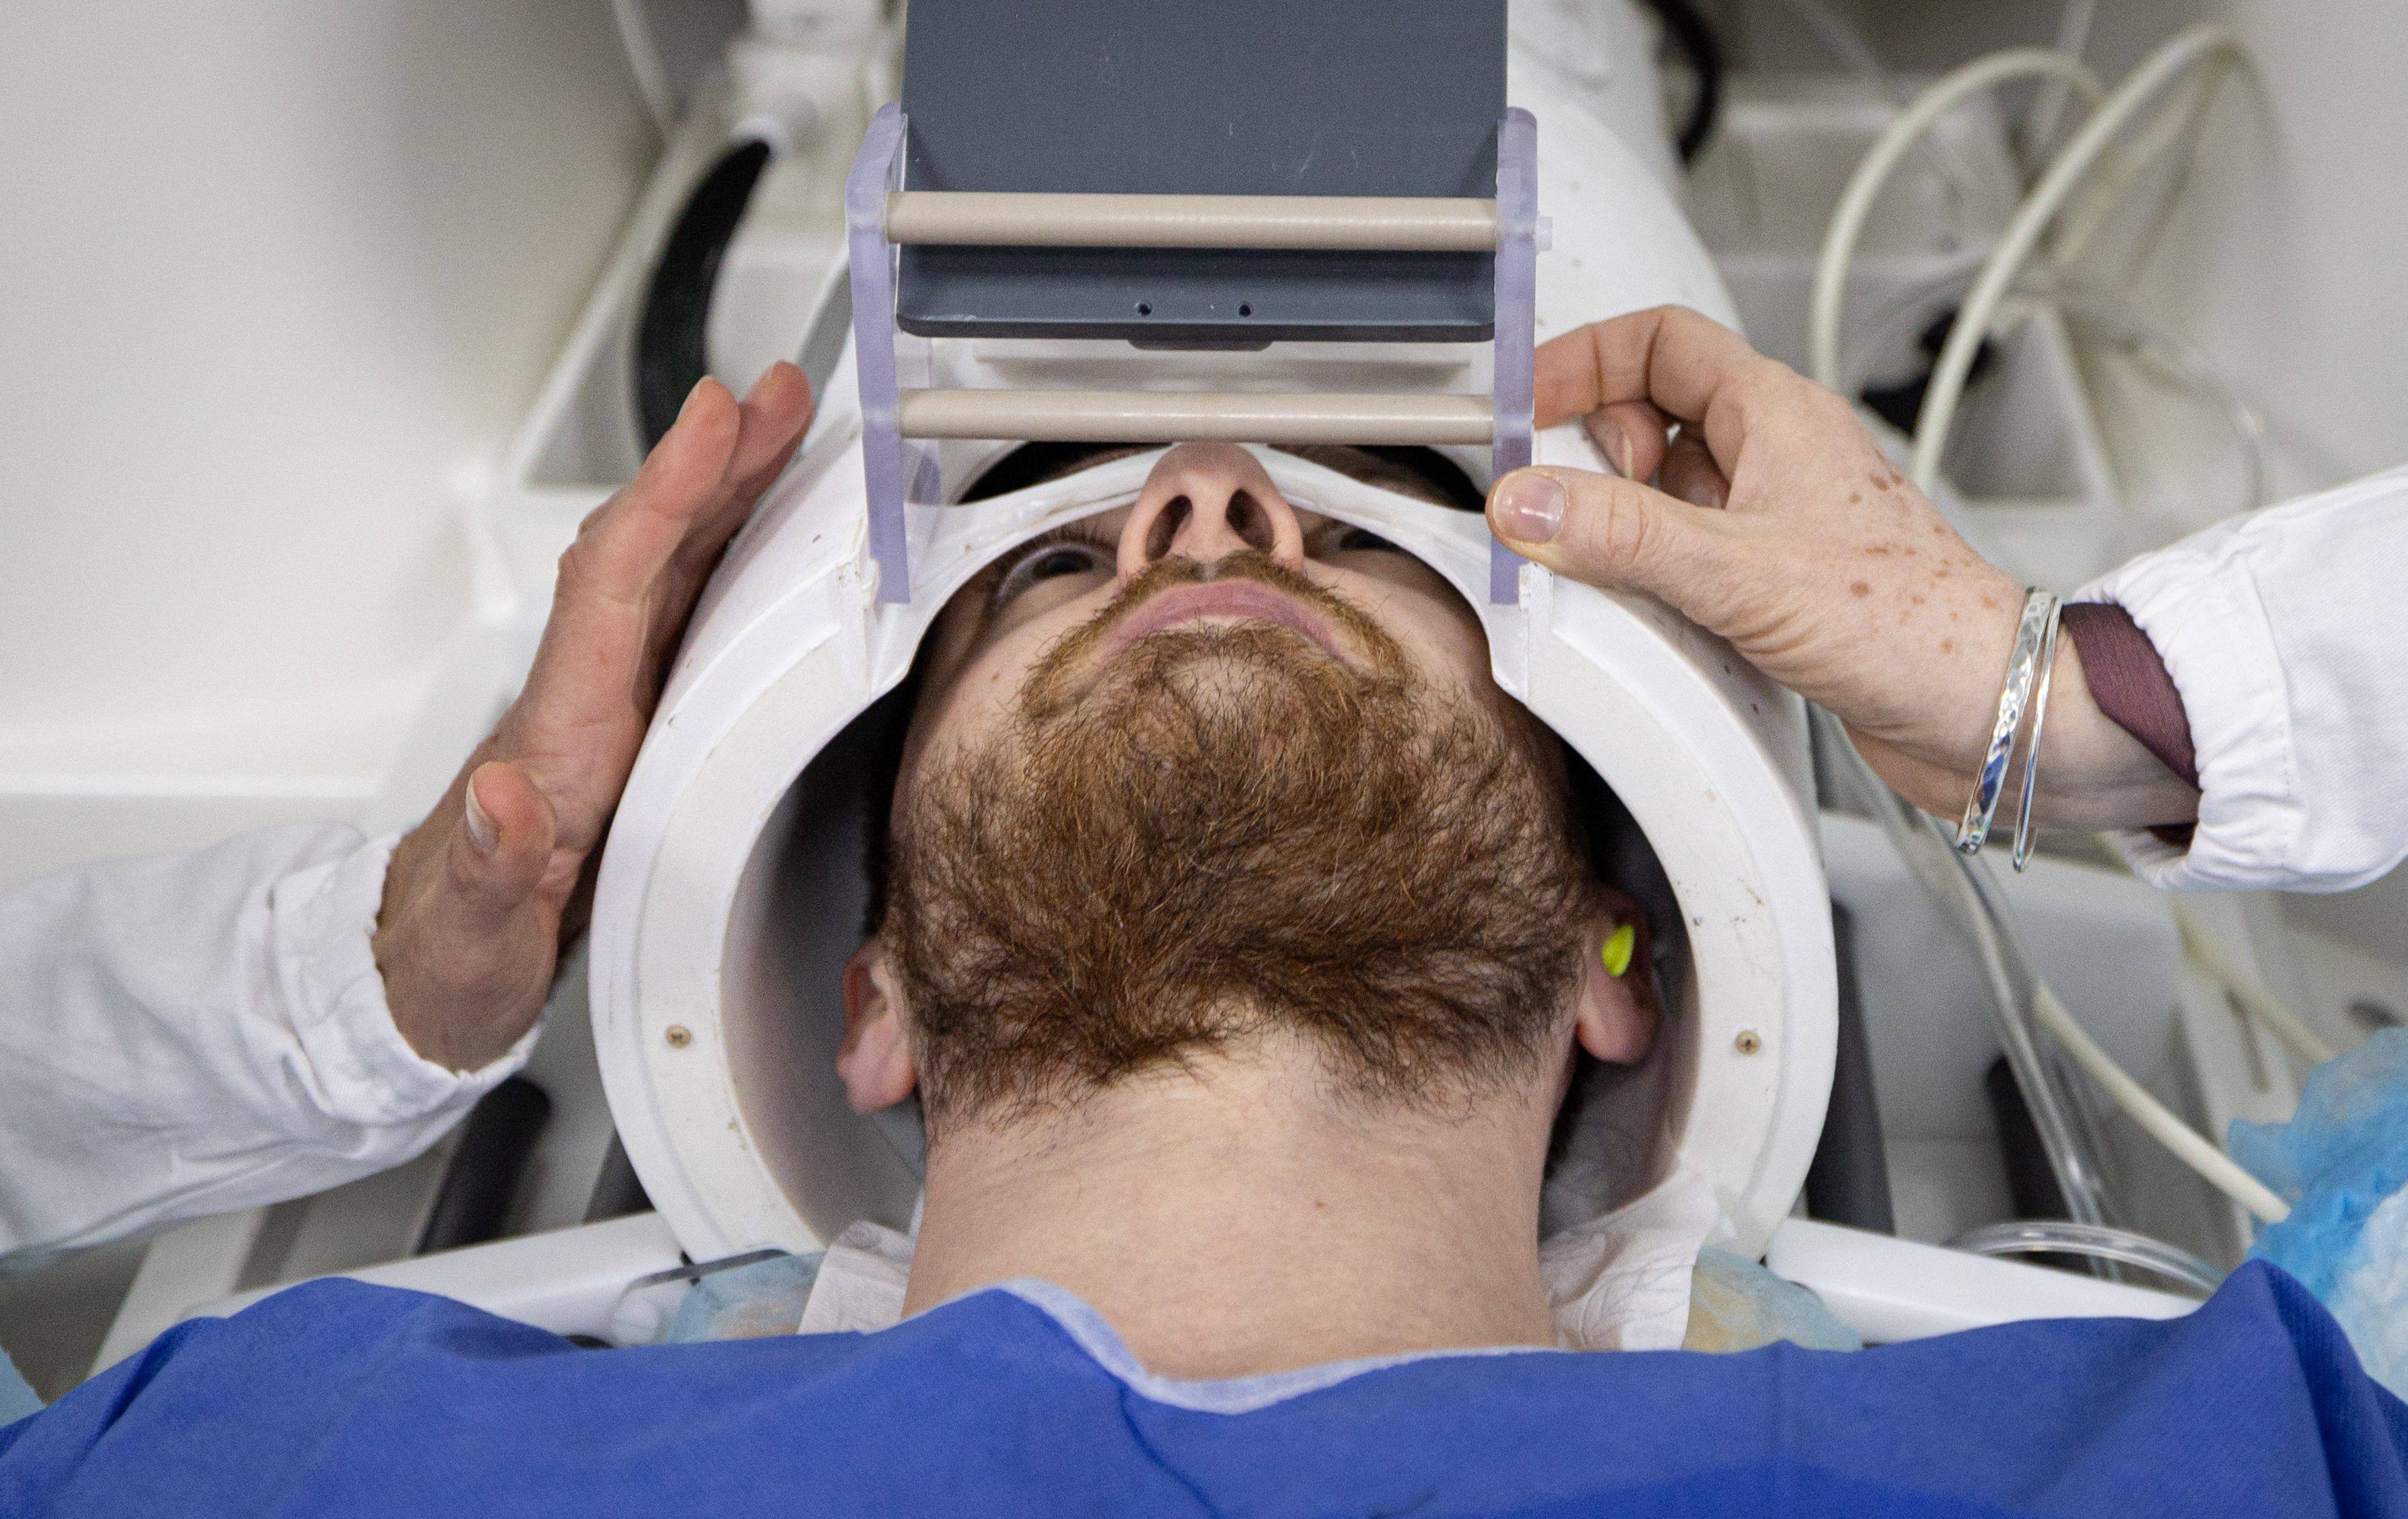 A volunteer takes part in an MR exam simulation. “Iseult”, the world’s most powerful MRI scanner, has delivered its first images of the human brain. Photo: AFP